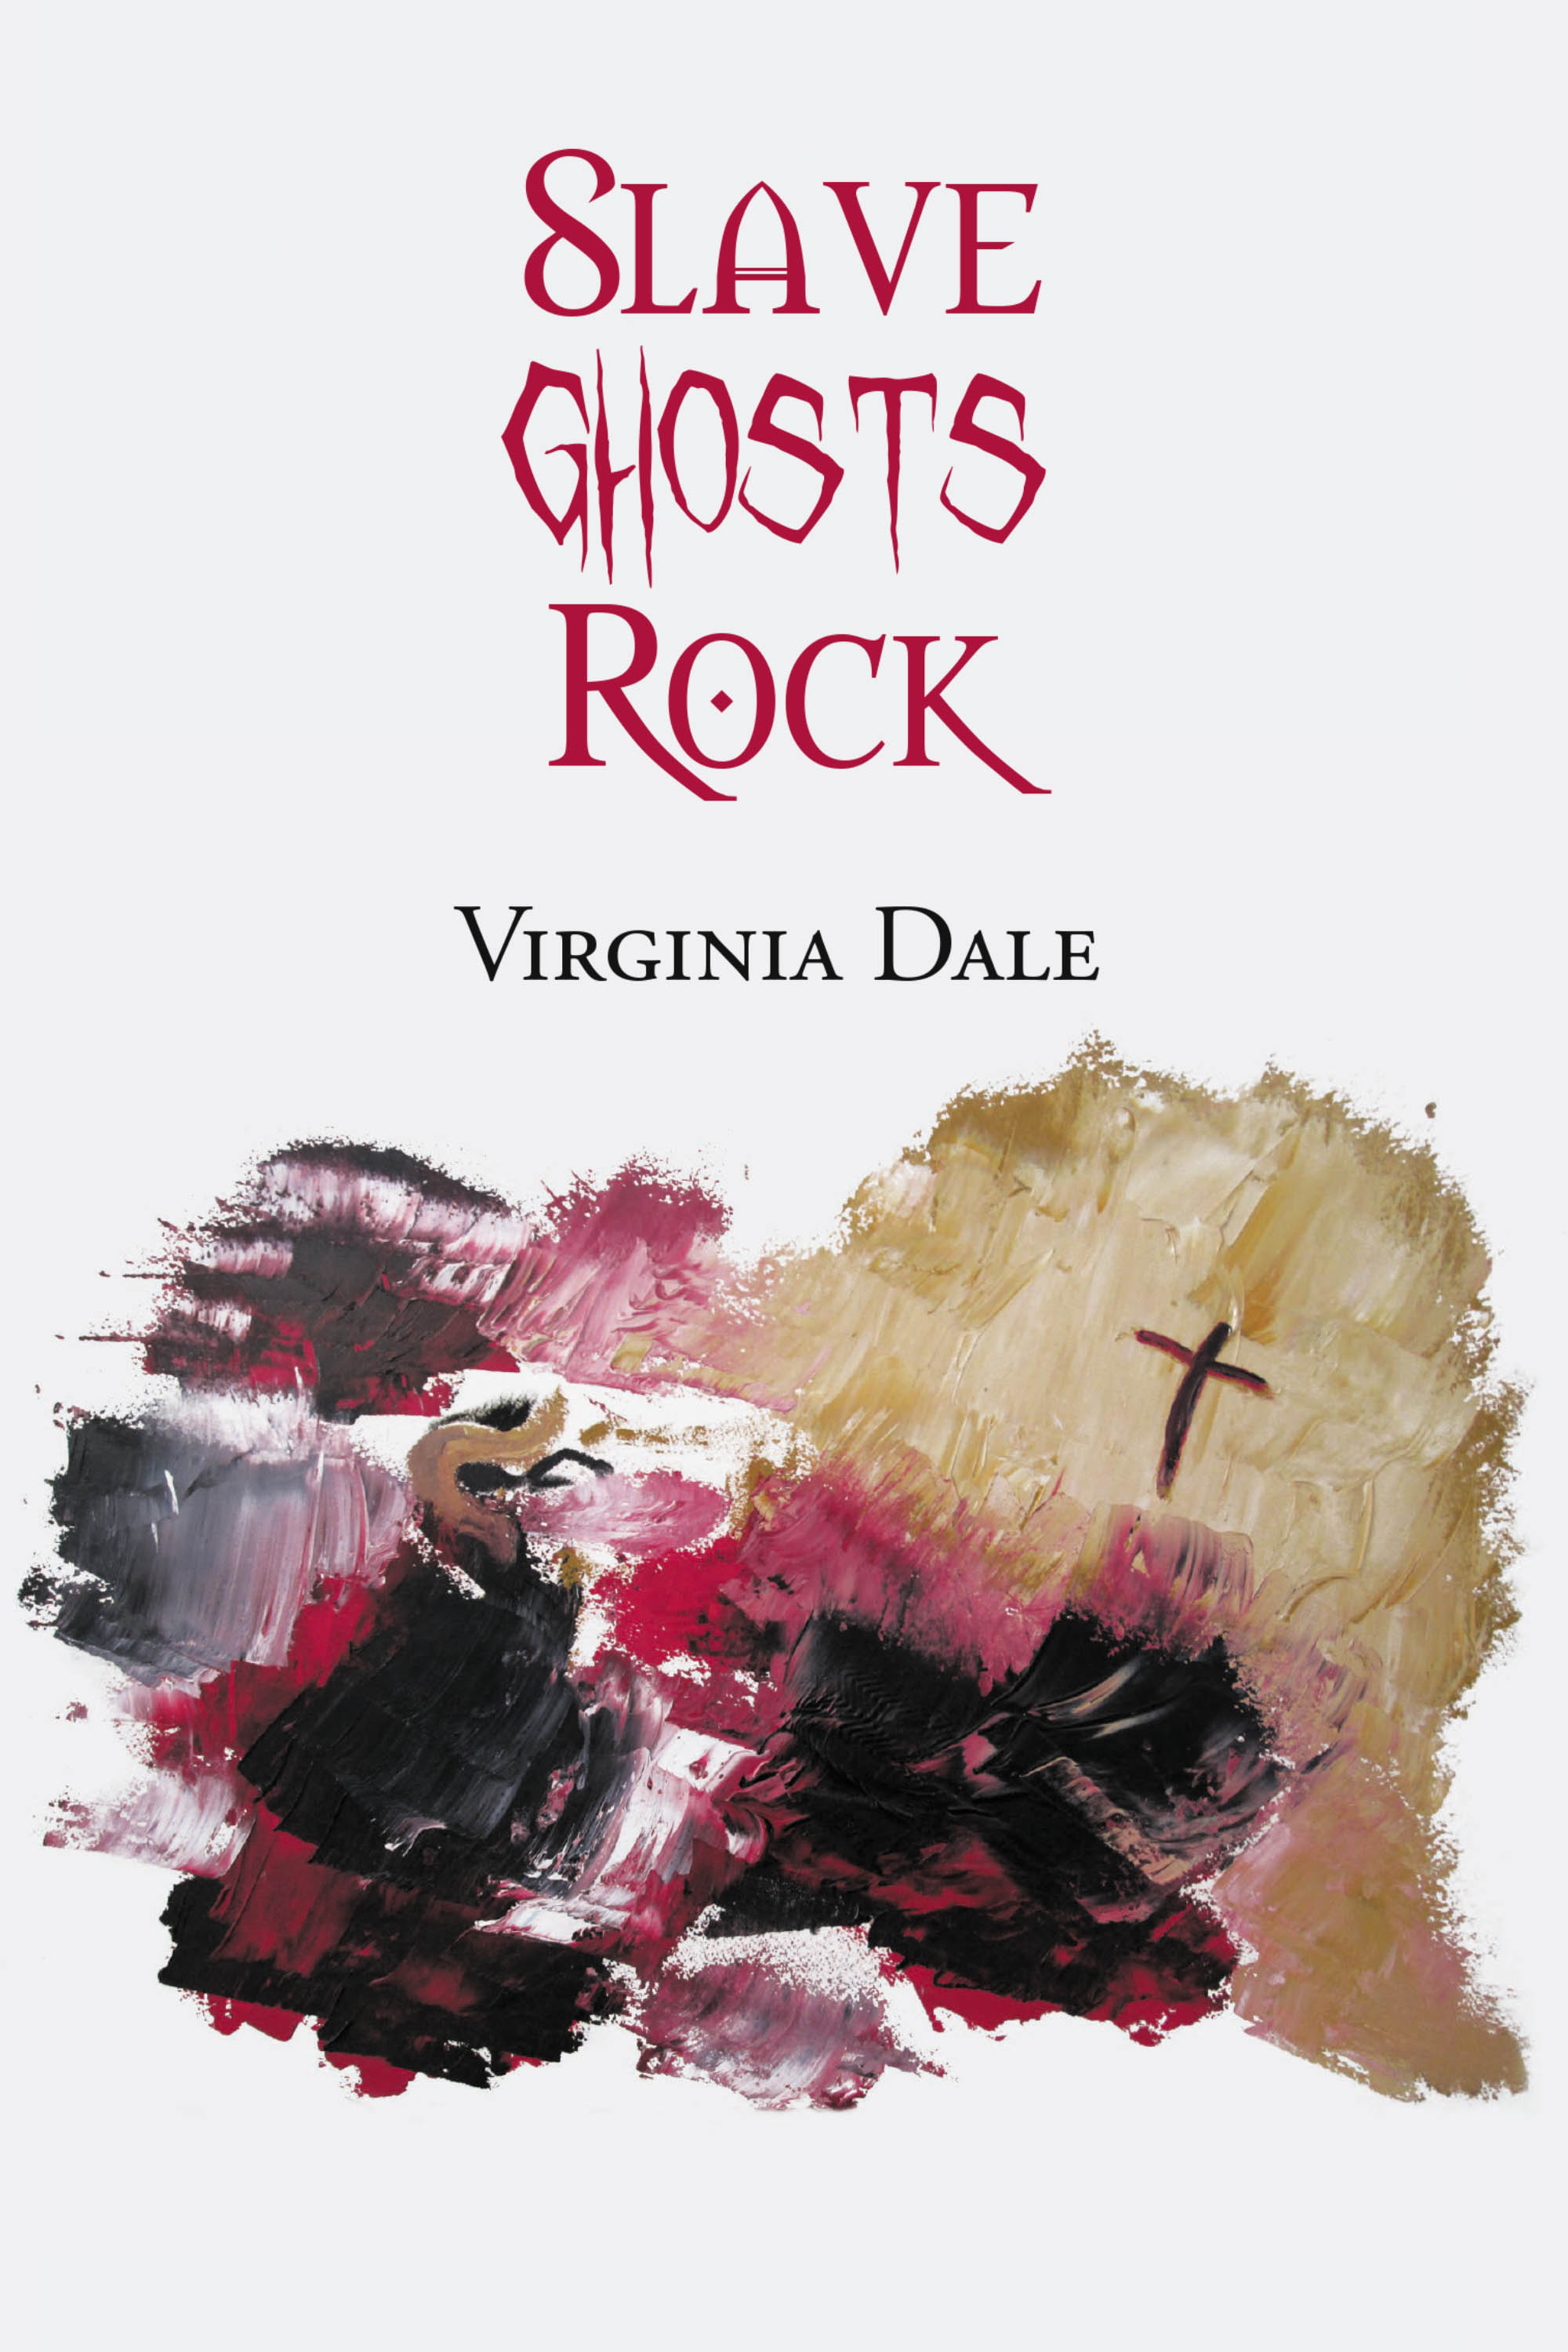 Author Virginia Dale’s New Book, "Slave Ghosts Rock," Plumbs the Depths of Human Depravity, Greed, Lust and Betrayal by Seemingly Beautiful People